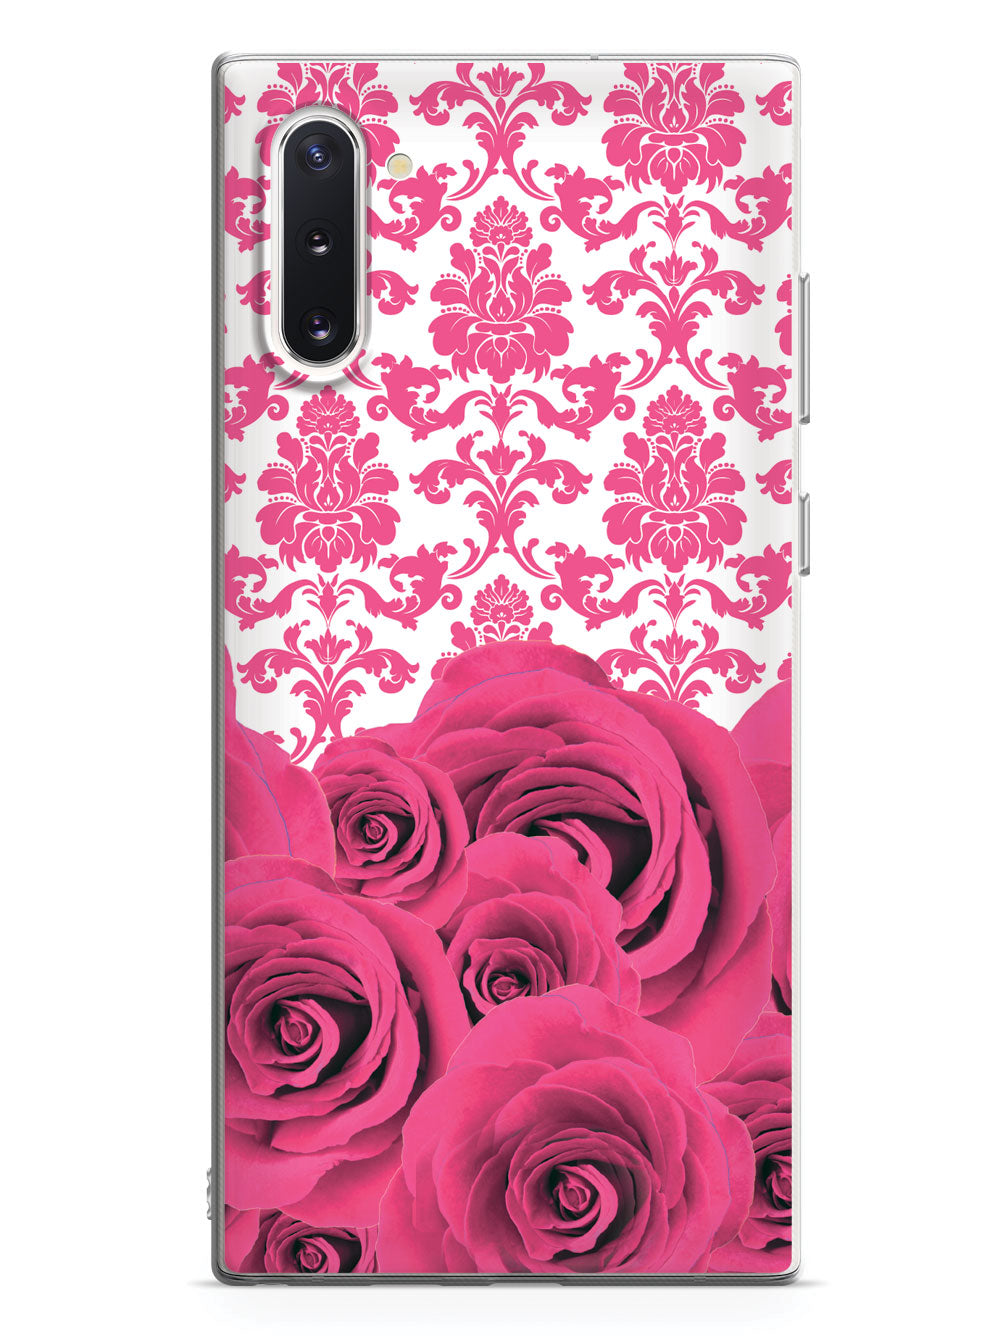 Damask and Roses - Pink Case